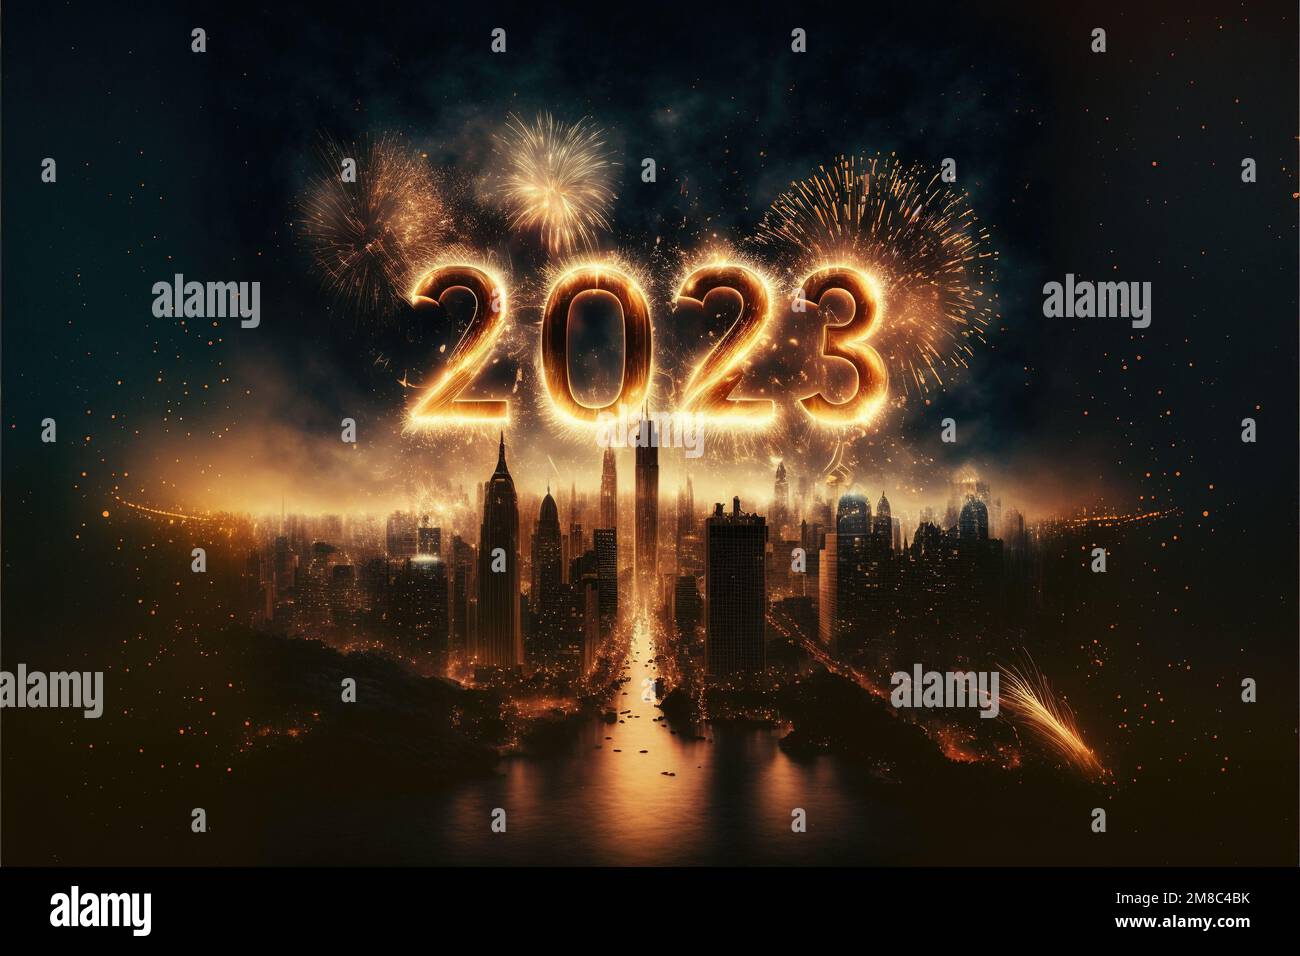 New Year 2023. Urban city landscape with fireworks. Holidays background Stock Photo